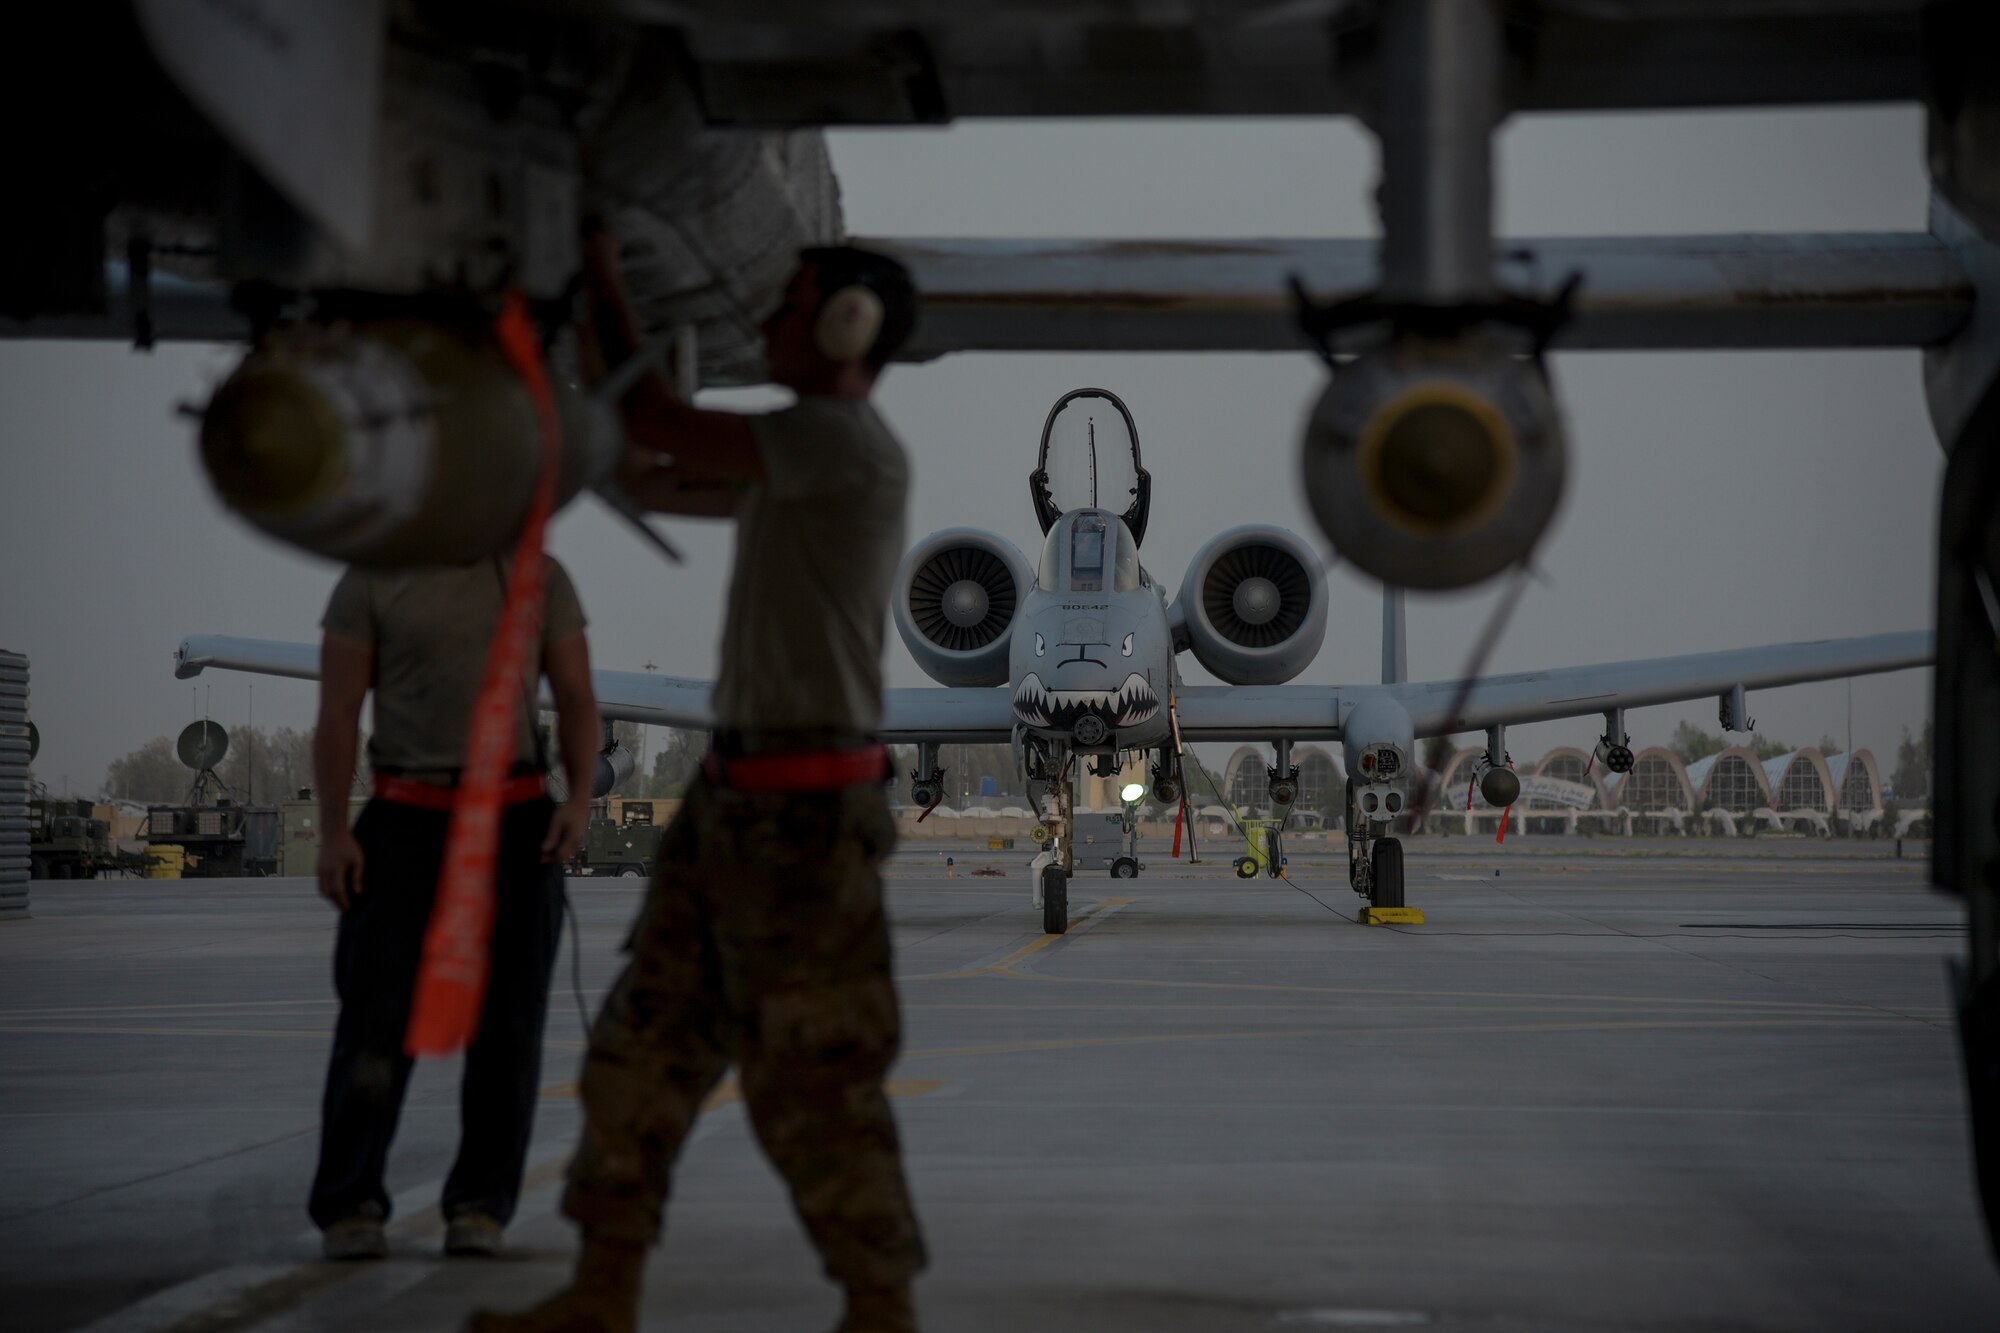 Crew chiefs from the 75th Expeditionary Fighter Squadron conduct pre-flight checks on an A-10C Thunderbolt II before take-off from Kandahar Airfield, Afghanistan, Aug. 2, 2018. The Airmen, from Moody Air Force Base, Georgia, are deployed in support of Operation Freedom's Sentinel by providing close-air support to Afghan forces and other coalition partners. The Thunderbolt II can employ a wide variety of conventional munitions, including general purpose bombs, cluster bomb units, laser guided bombs, joint direct attack munitions or JDAM, wind corrected munitions dispenser or WCMD, AGM-65 Maverick and AIM-9 Sidewinder missiles, rockets, illumination flares and the GAU-8/A 30mm cannon, capable of firing 3,900 rounds per minute. (U.S. Air Force photo by Staff Sgt. Kristin High)